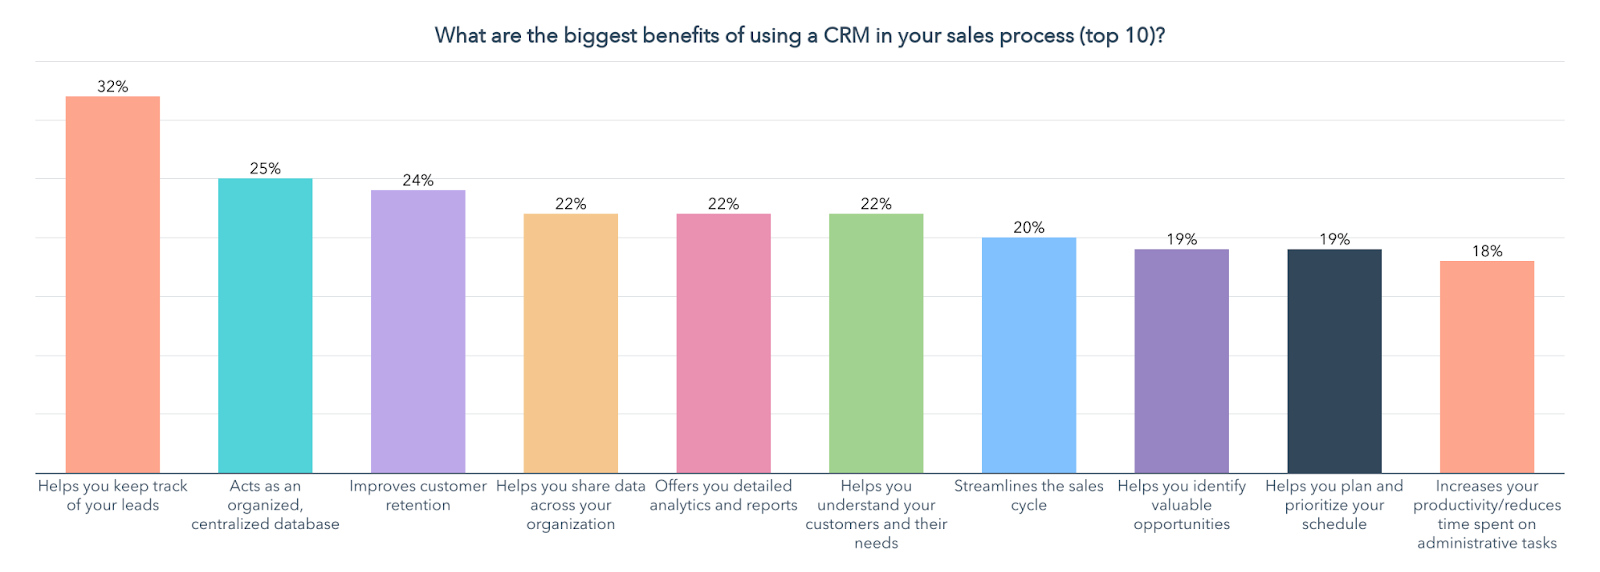 benefits of using a CRM